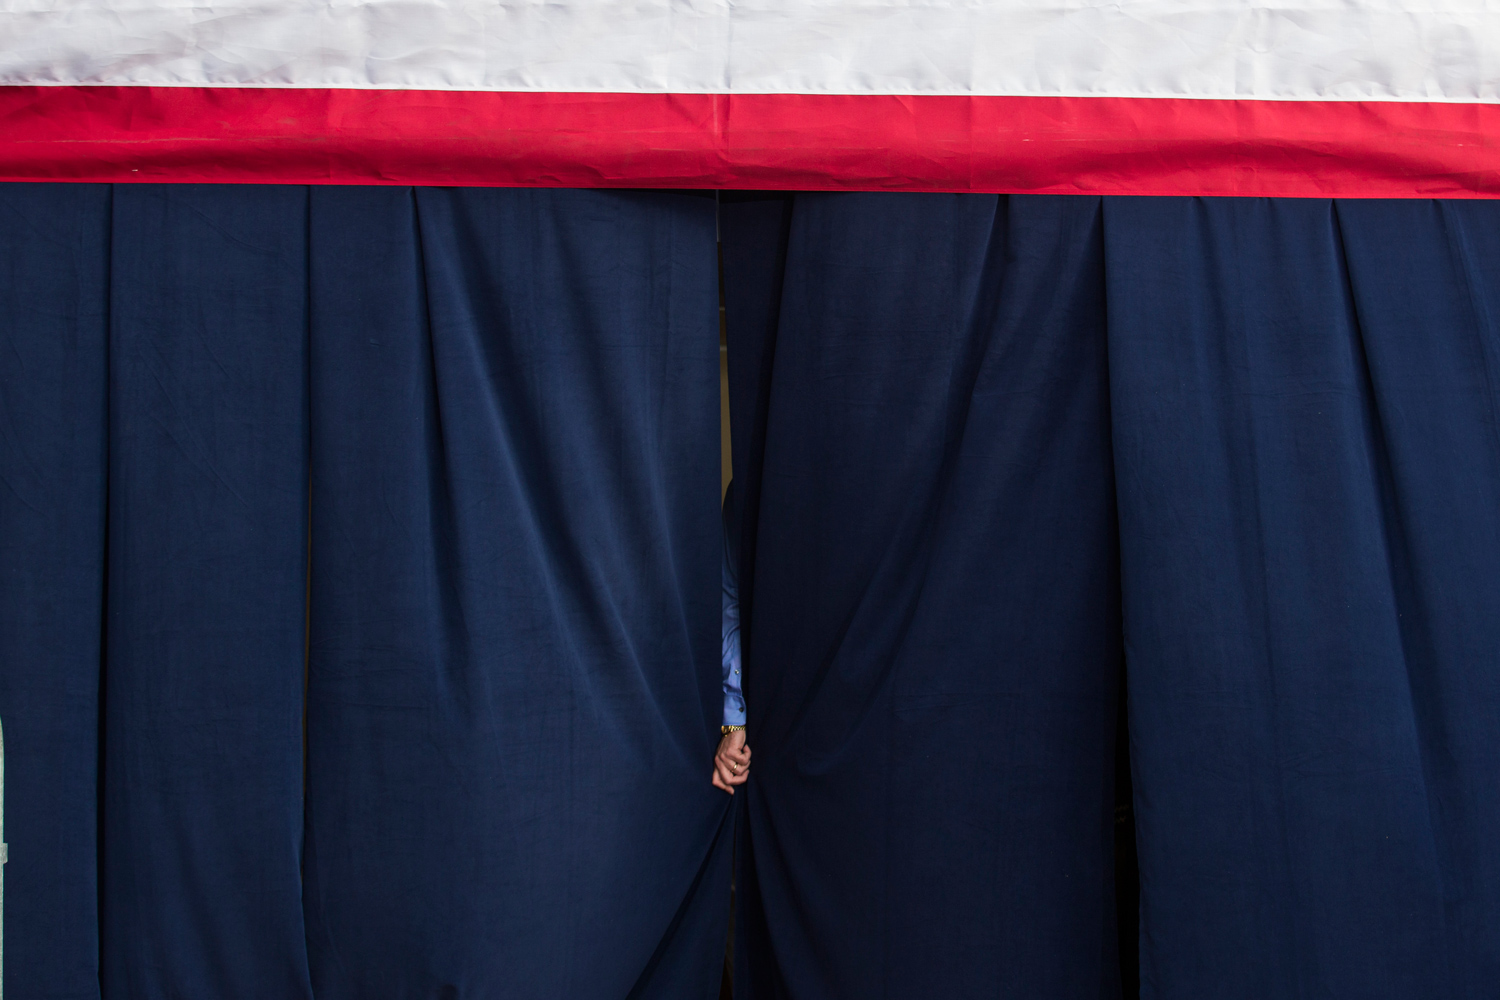 Oct. 25, 2012. A member holds a curtain backstage before the arrival of U.S. President at a campaign rally in Tampa.